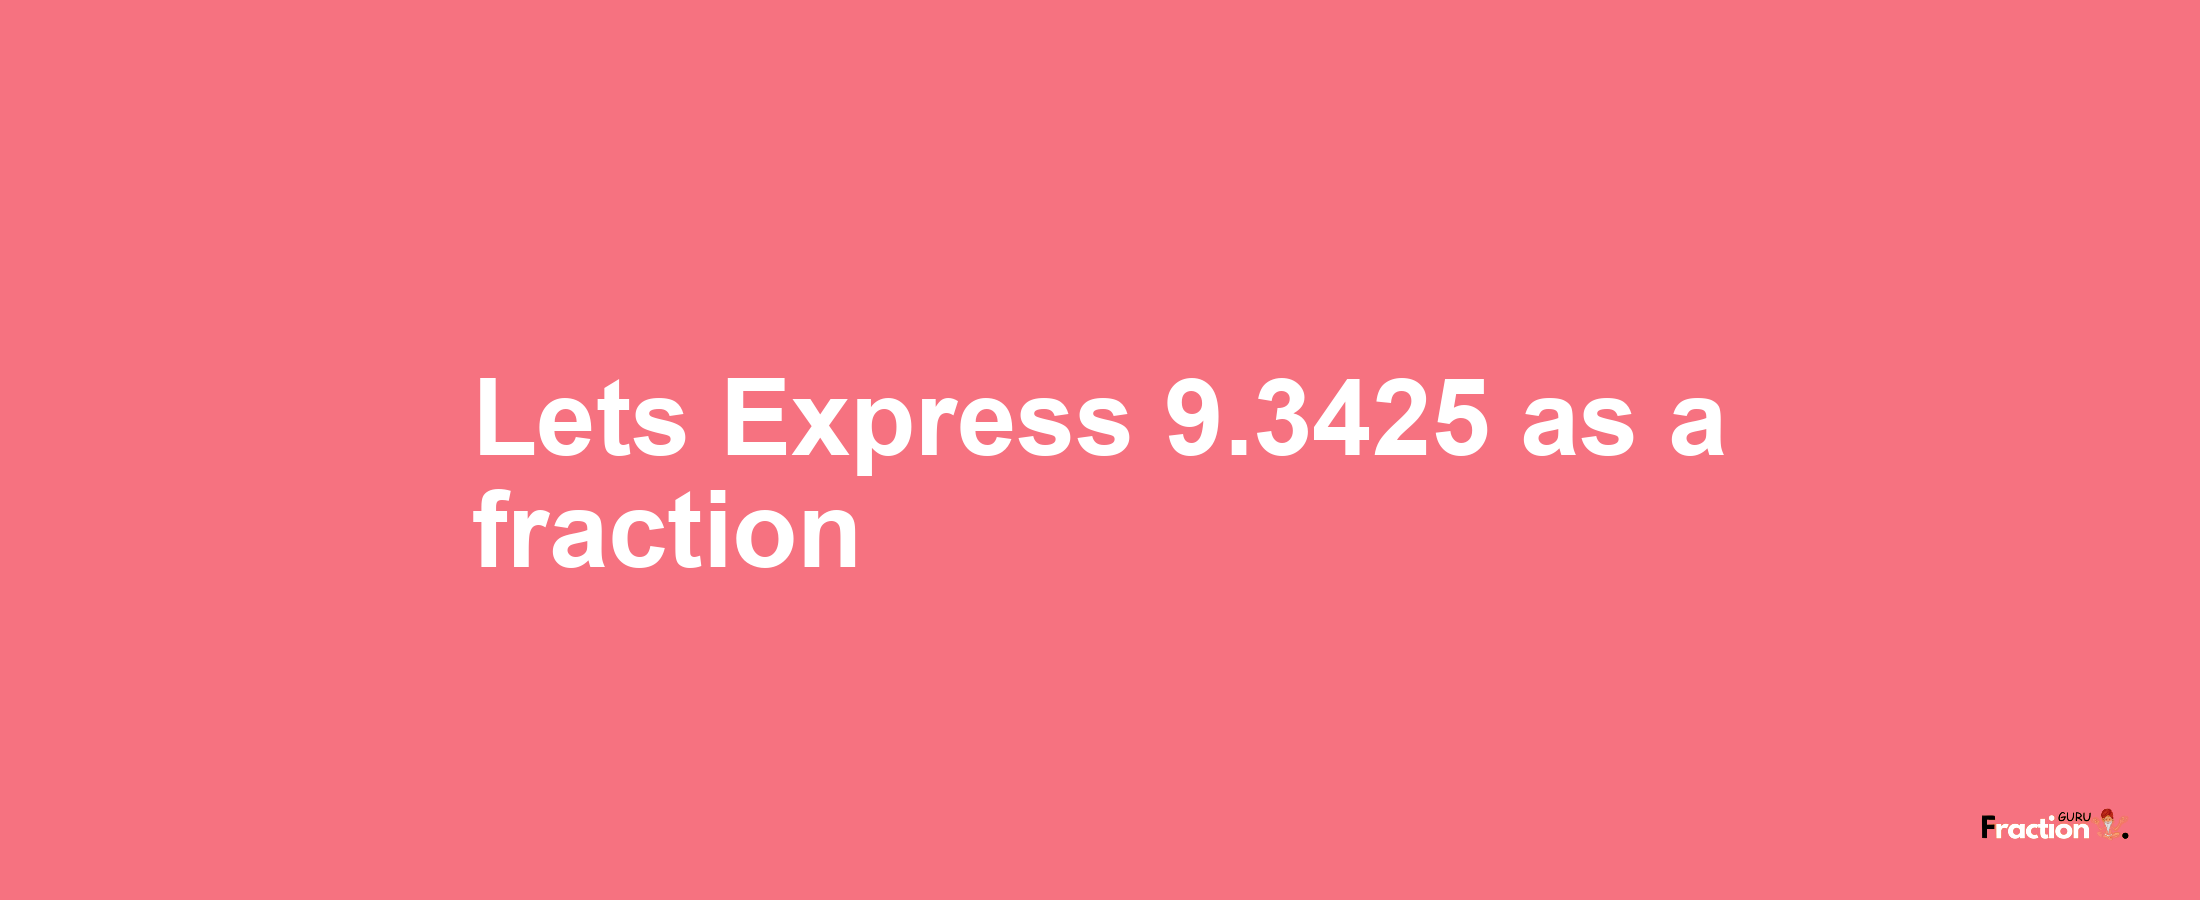 Lets Express 9.3425 as afraction